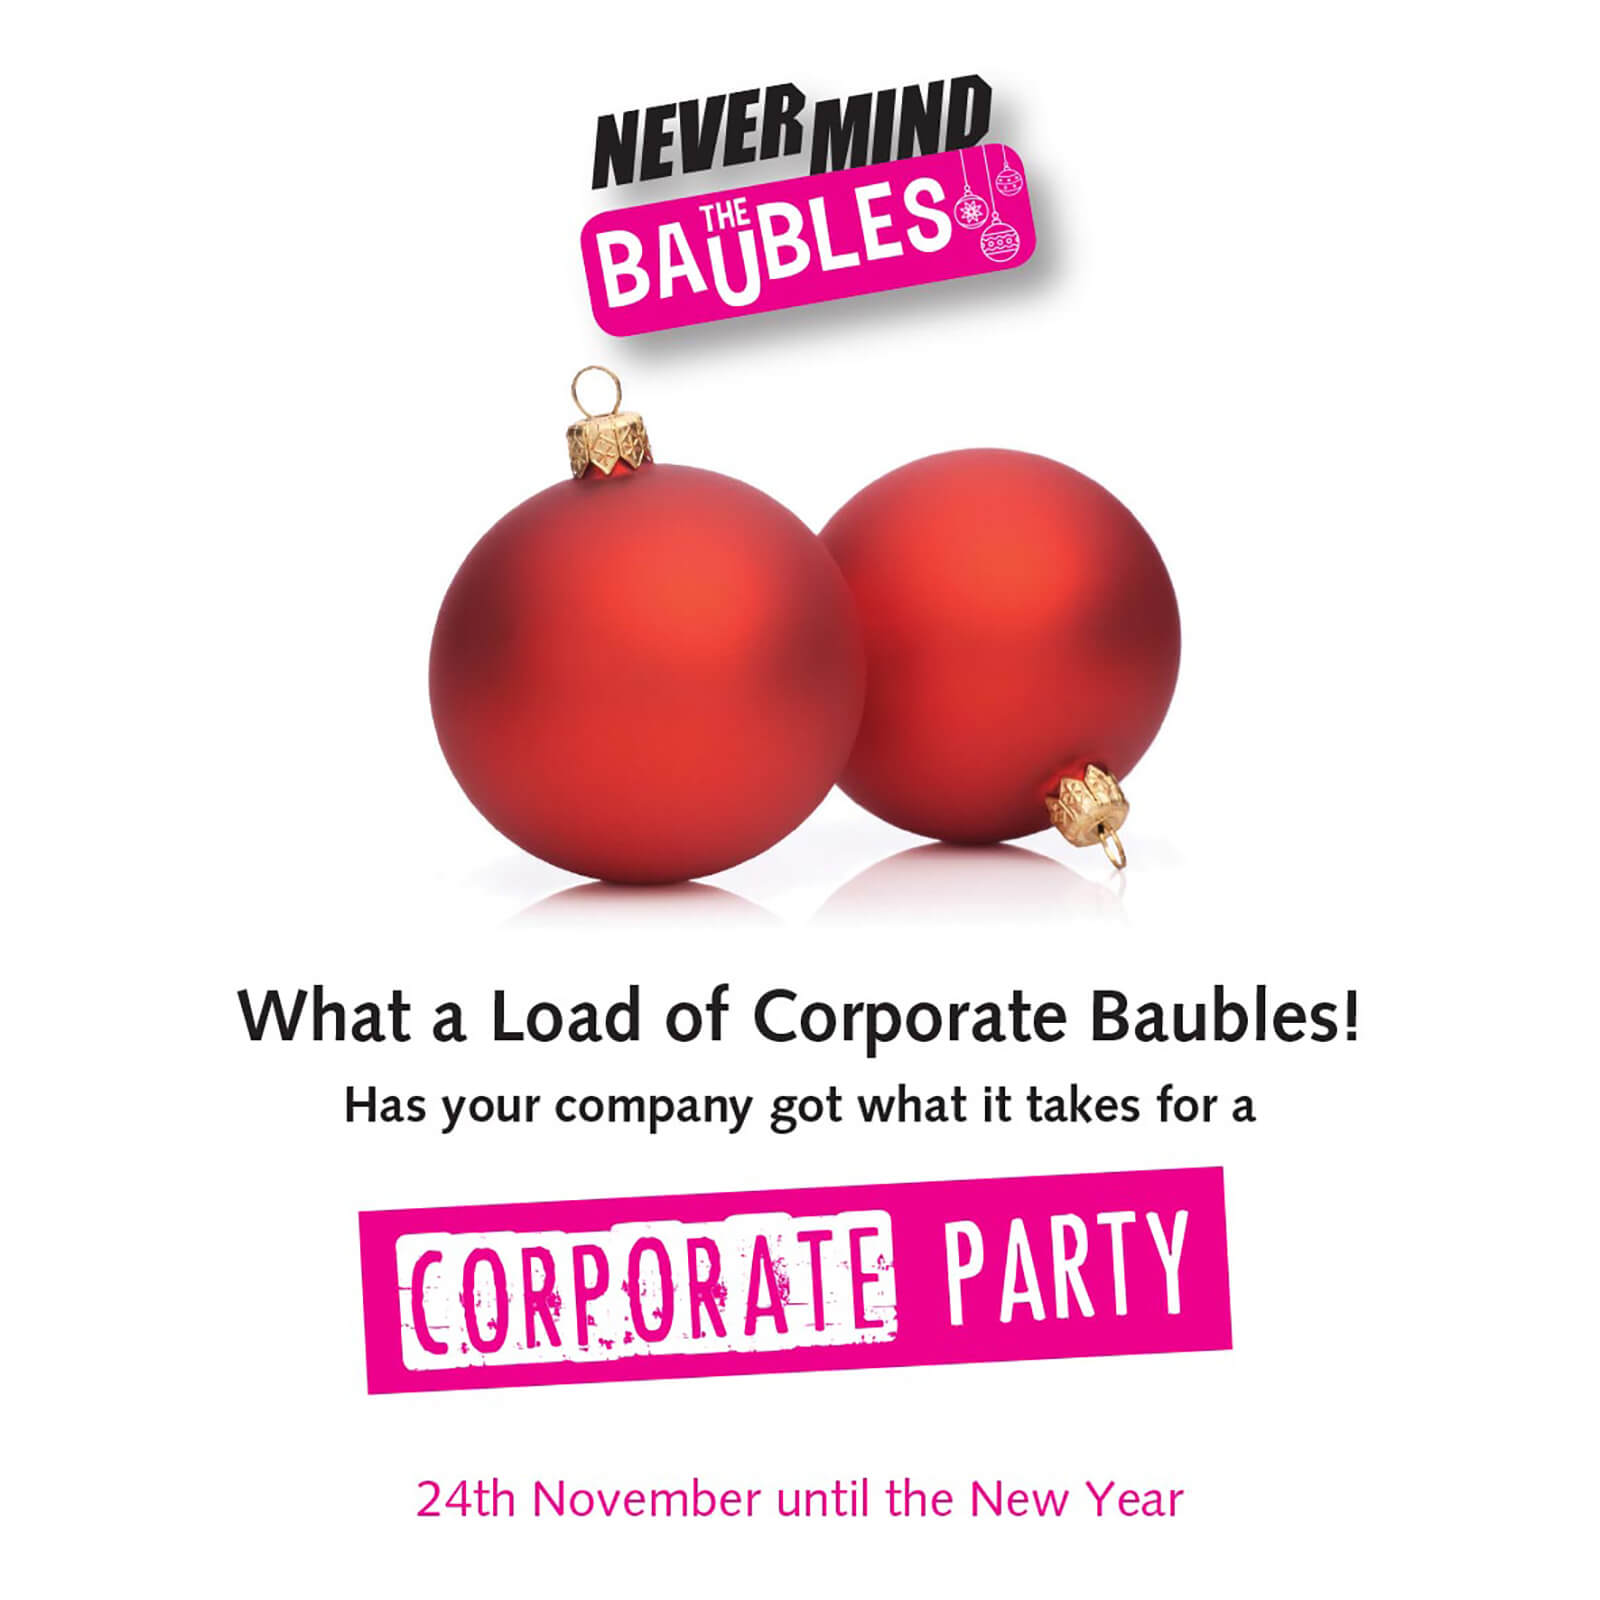 Never mind the baubles Poster